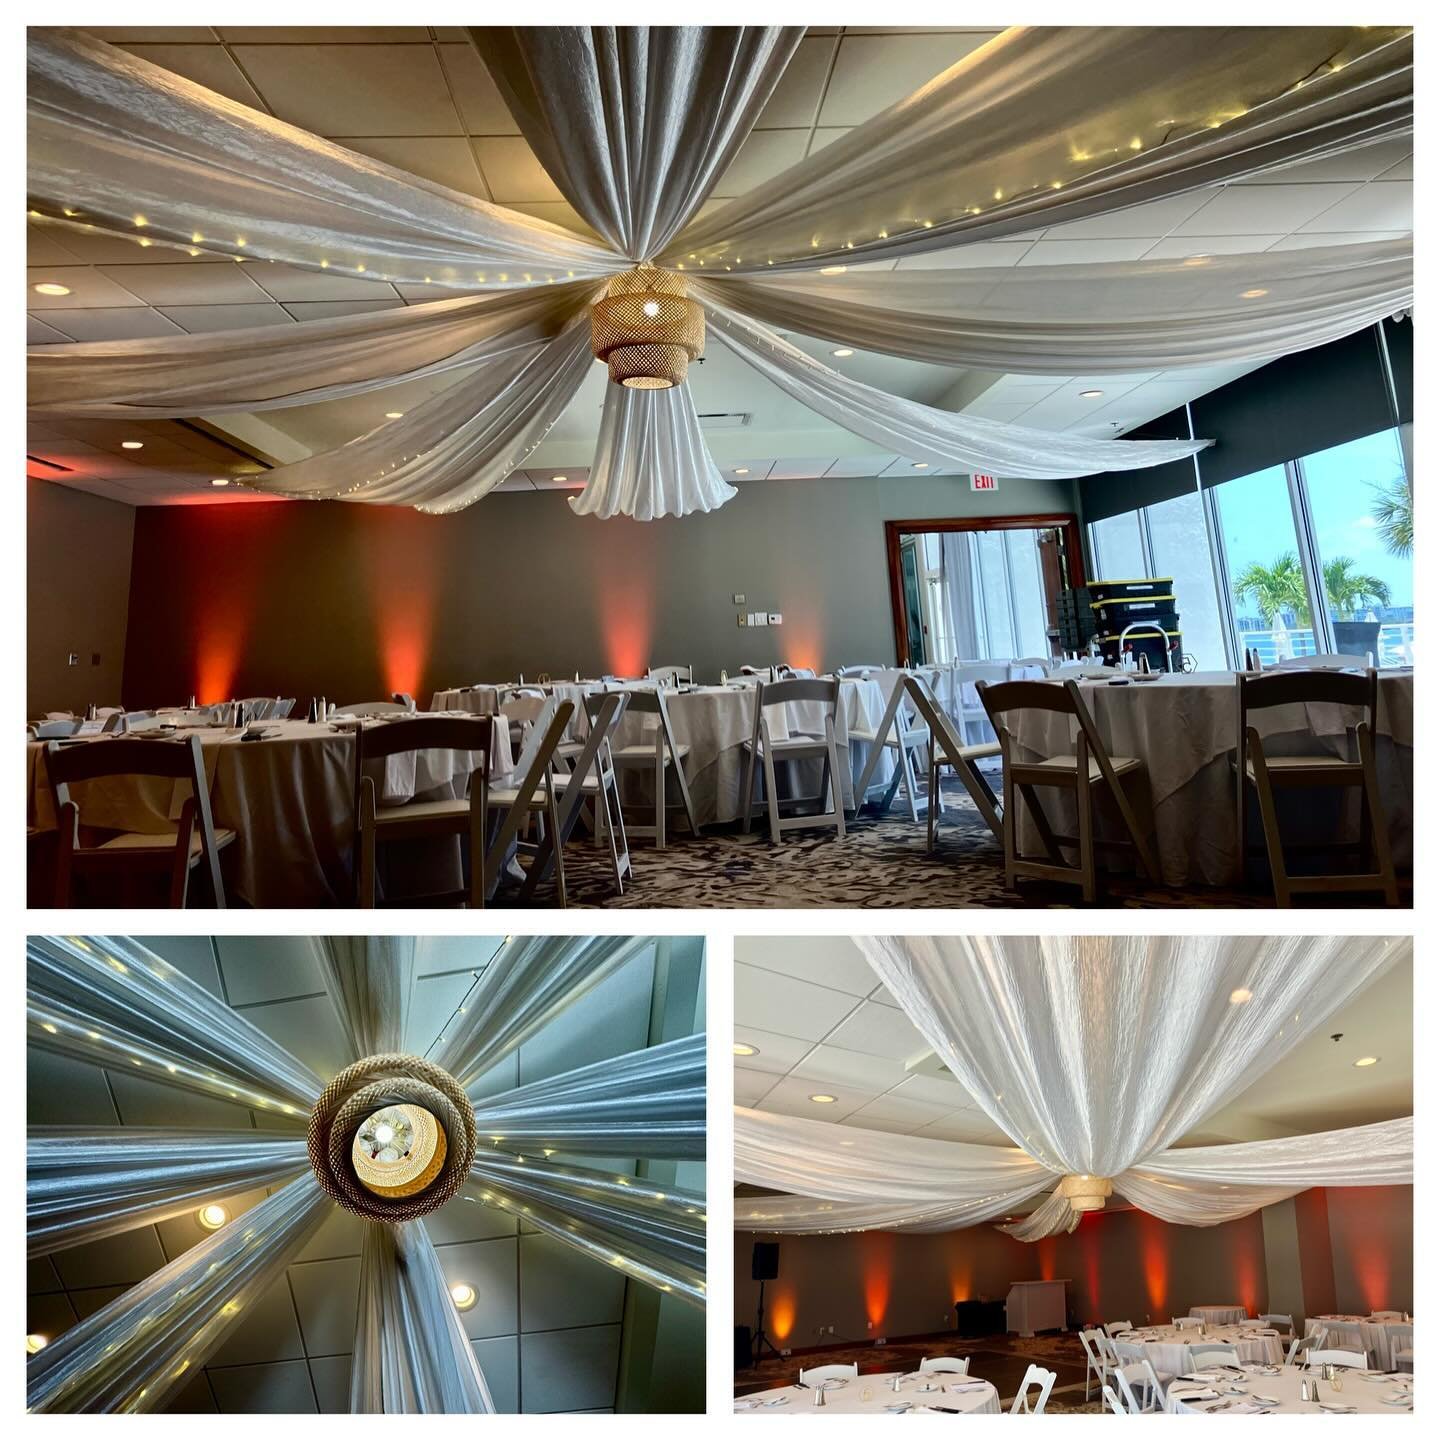 At the Clearwater Beach Marriott providing our 8 Panel Draped Ceiling Starburst w/String Lights &amp; Boho Chandelier + Amber Up Lighting. &mdash;&mdash;&mdash;&mdash;&mdash;&mdash;&mdash;&mdash;&mdash;&mdash;&mdash;&mdash;&mdash;&mdash;&mdash;&mdash